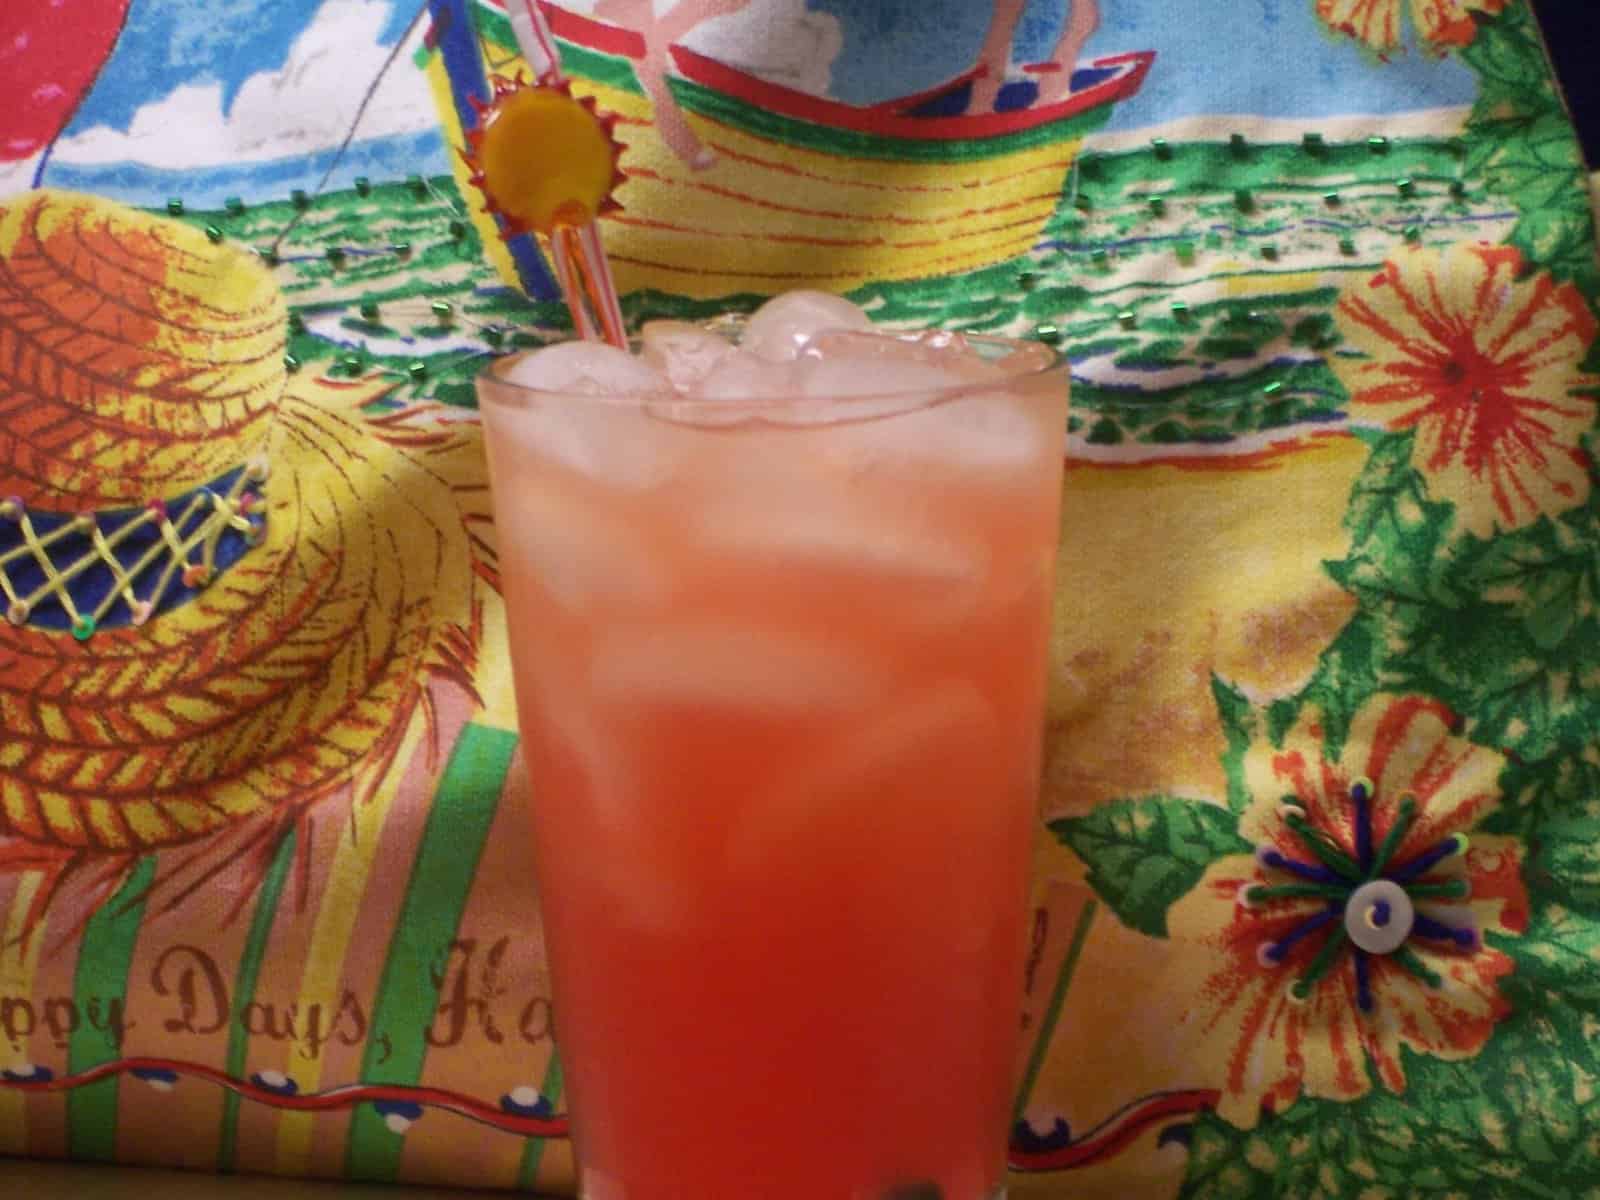  A sip of the Rum Relaxer will transport you straight to the Caribbean.